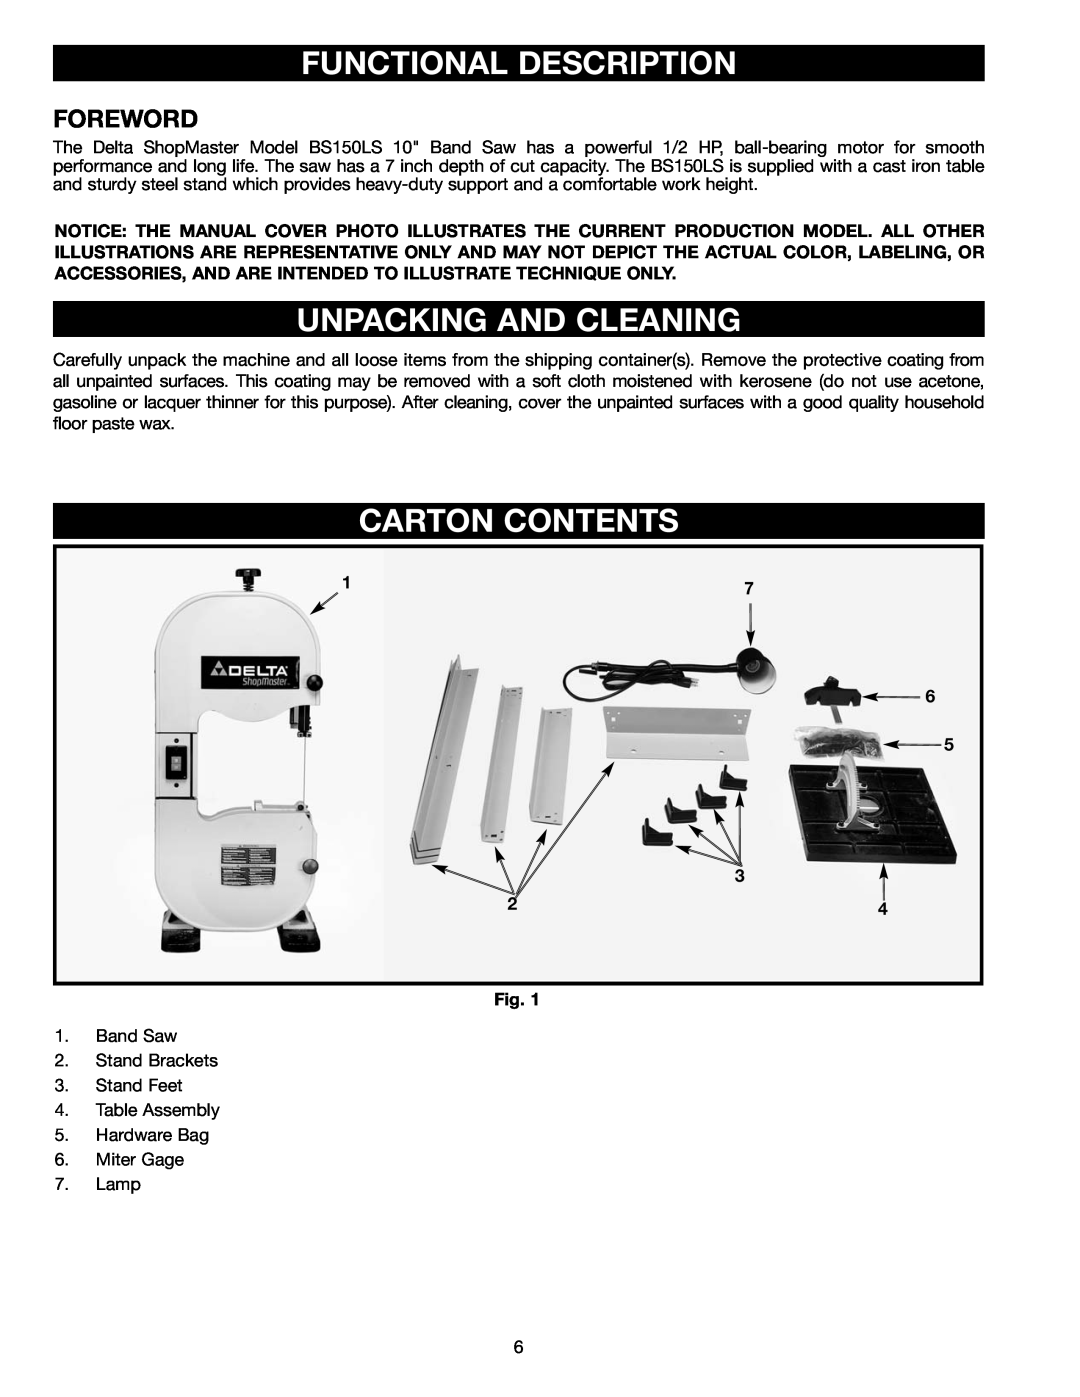 Delta BS150LS instruction manual Functional Description, Unpacking And Cleaning, Carton Contents, Foreword 